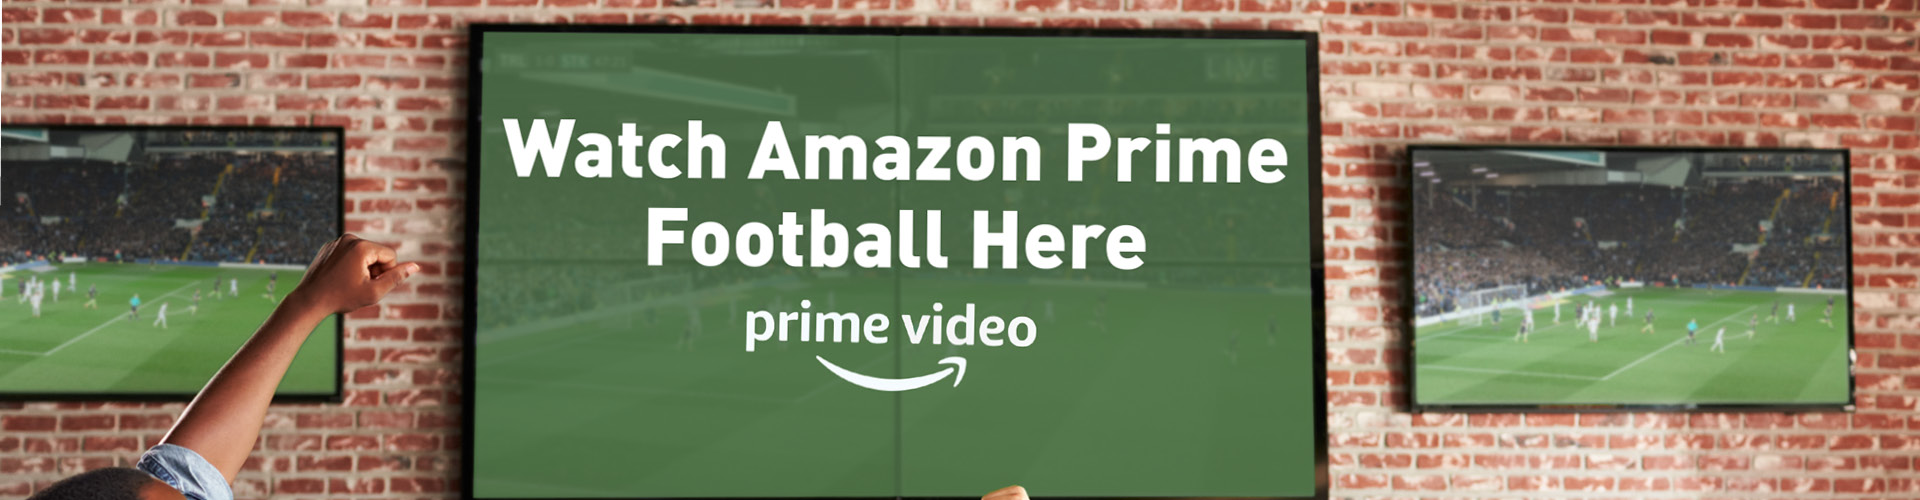 Watch Amazon Prime football at The Pembroke in Coulsdon